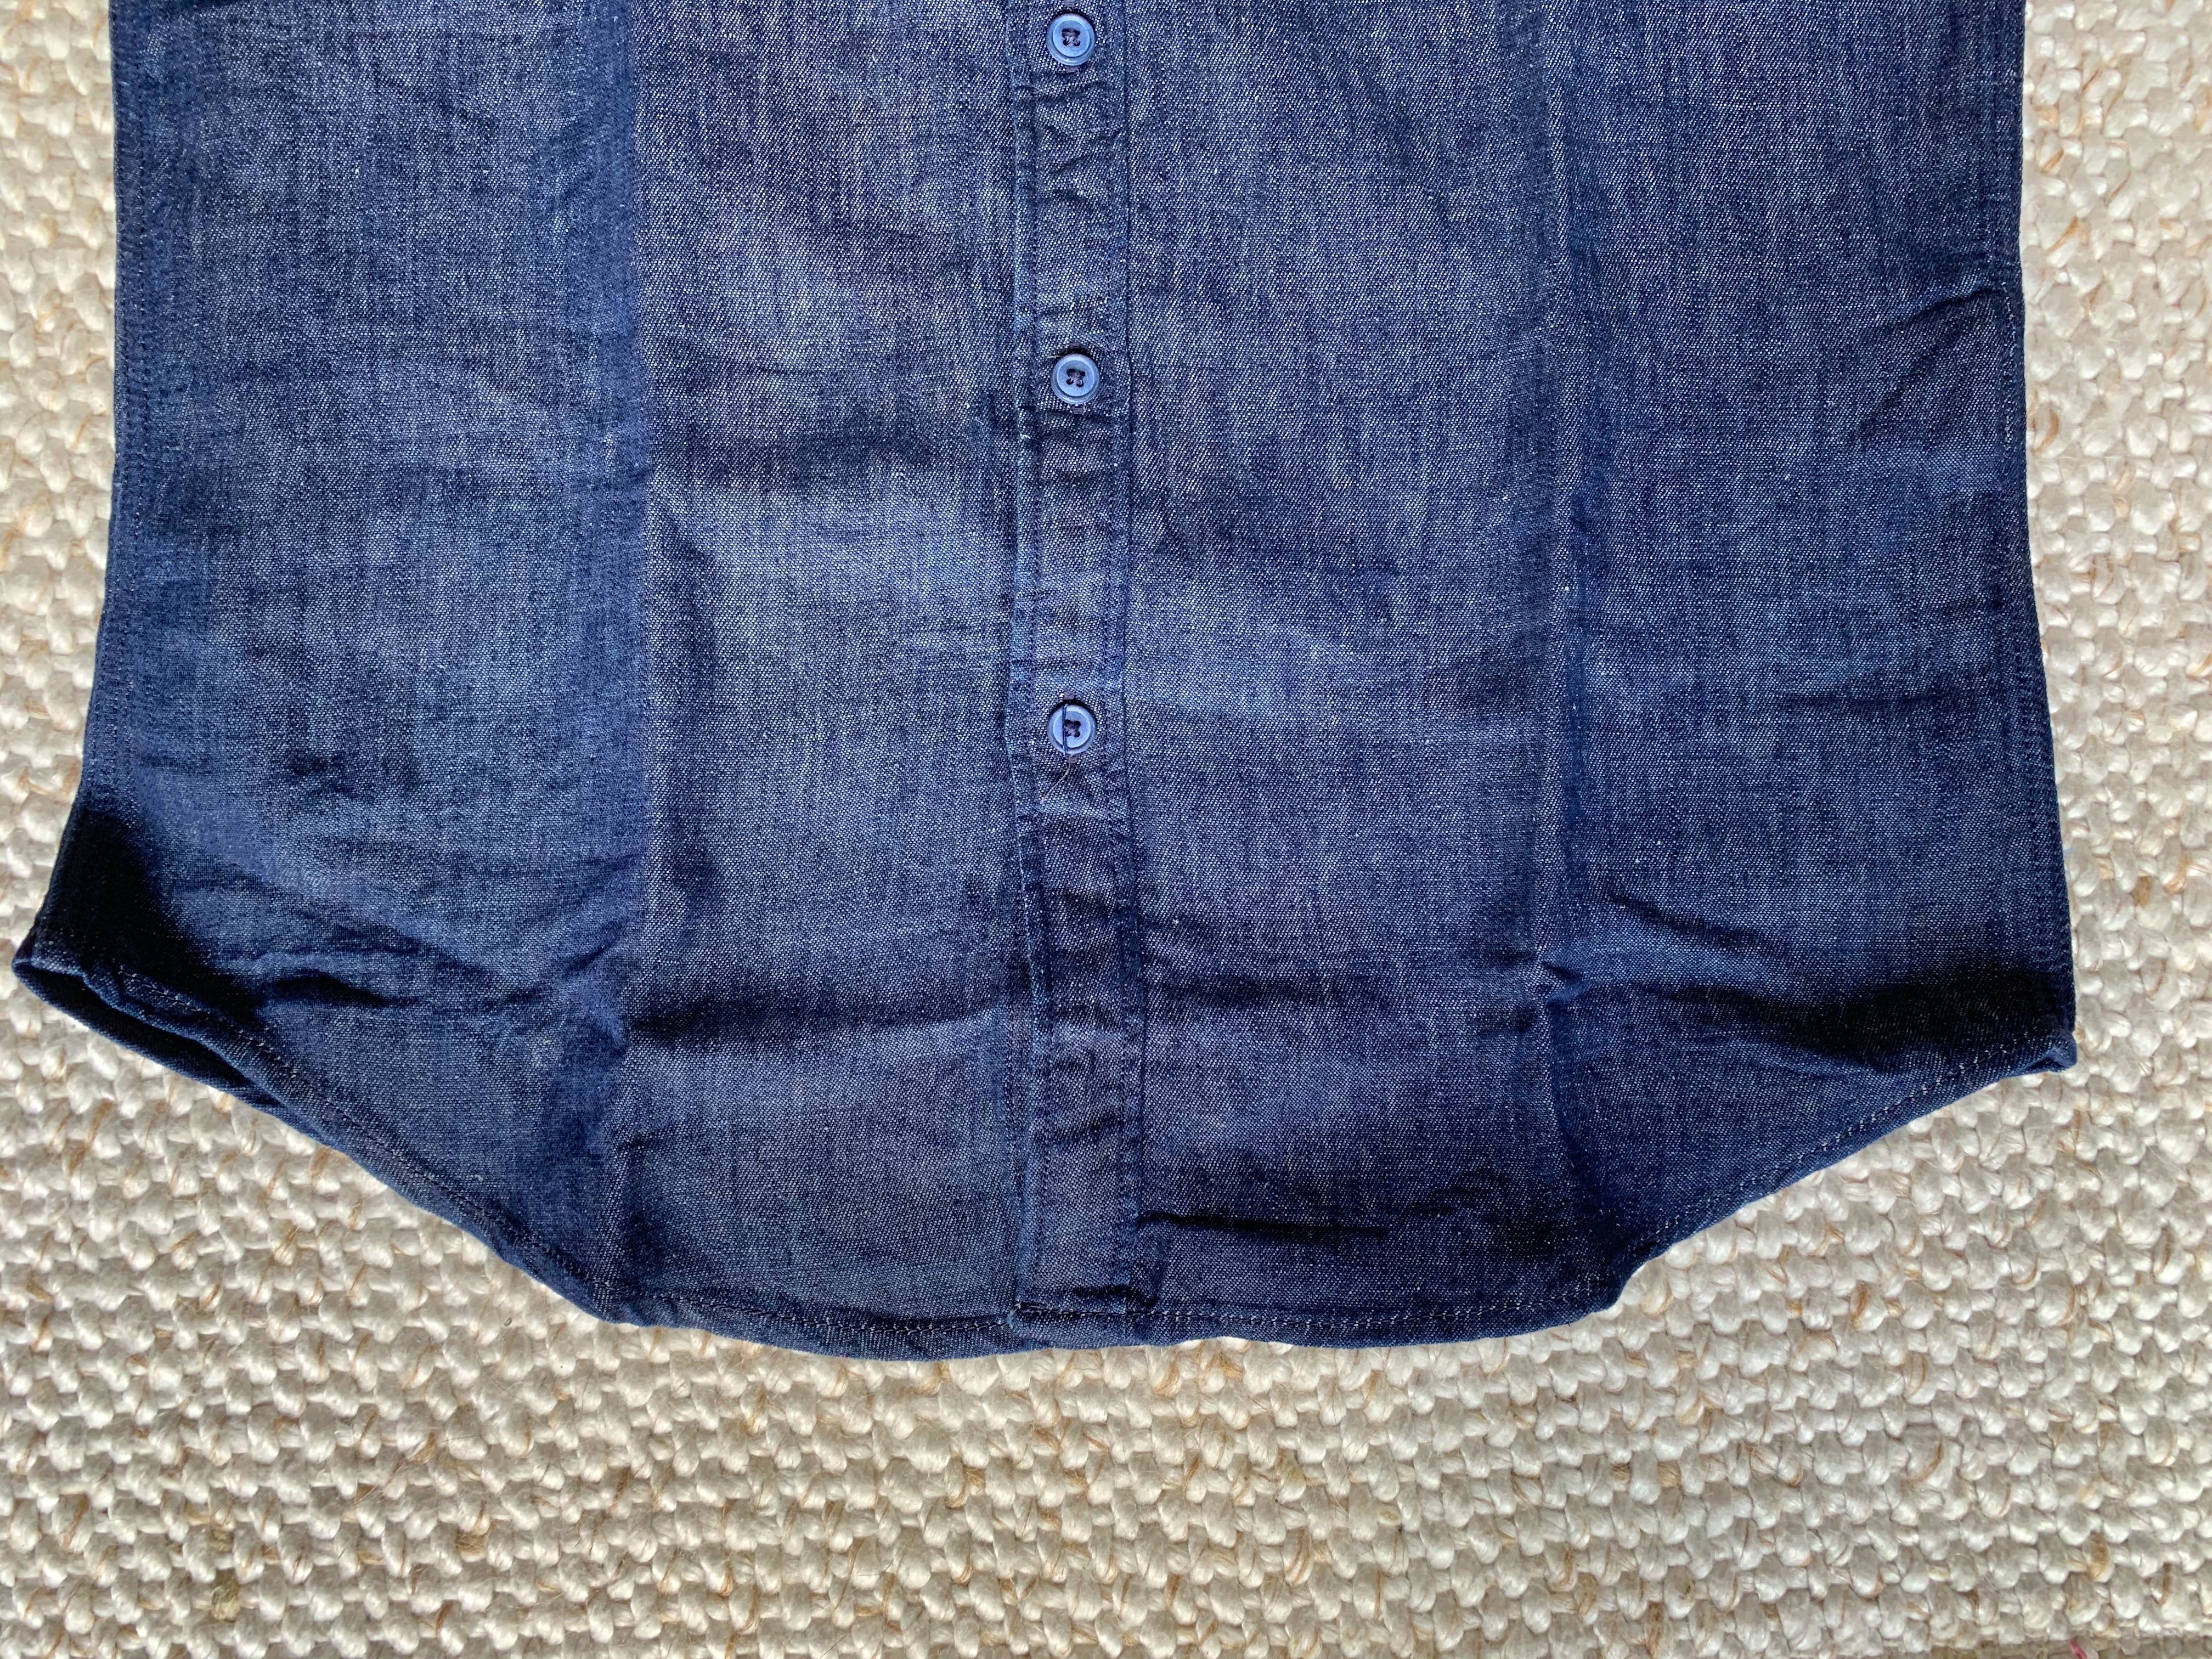 Outerknown - NWT $128 - Outerknown X Levi's Western w/ Stitched Yoke - 3